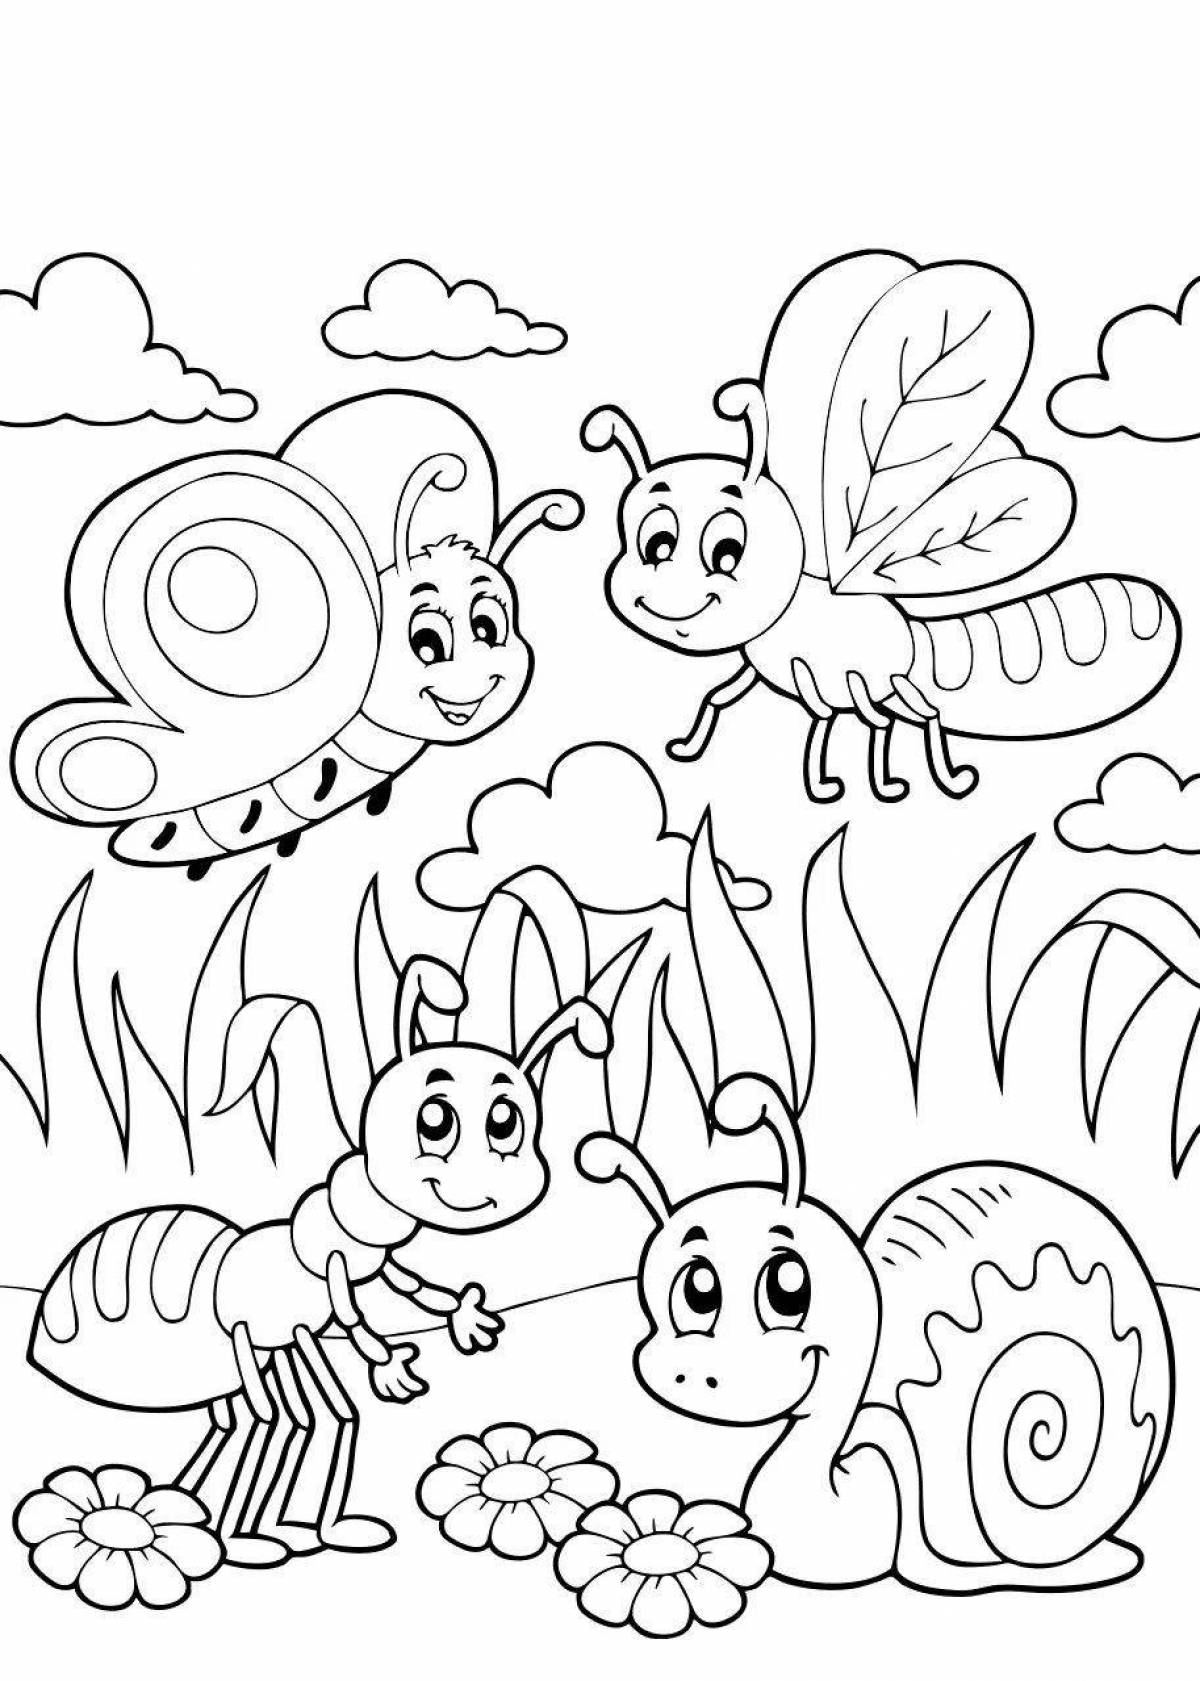 Cute insect coloring book for 6-7 year olds